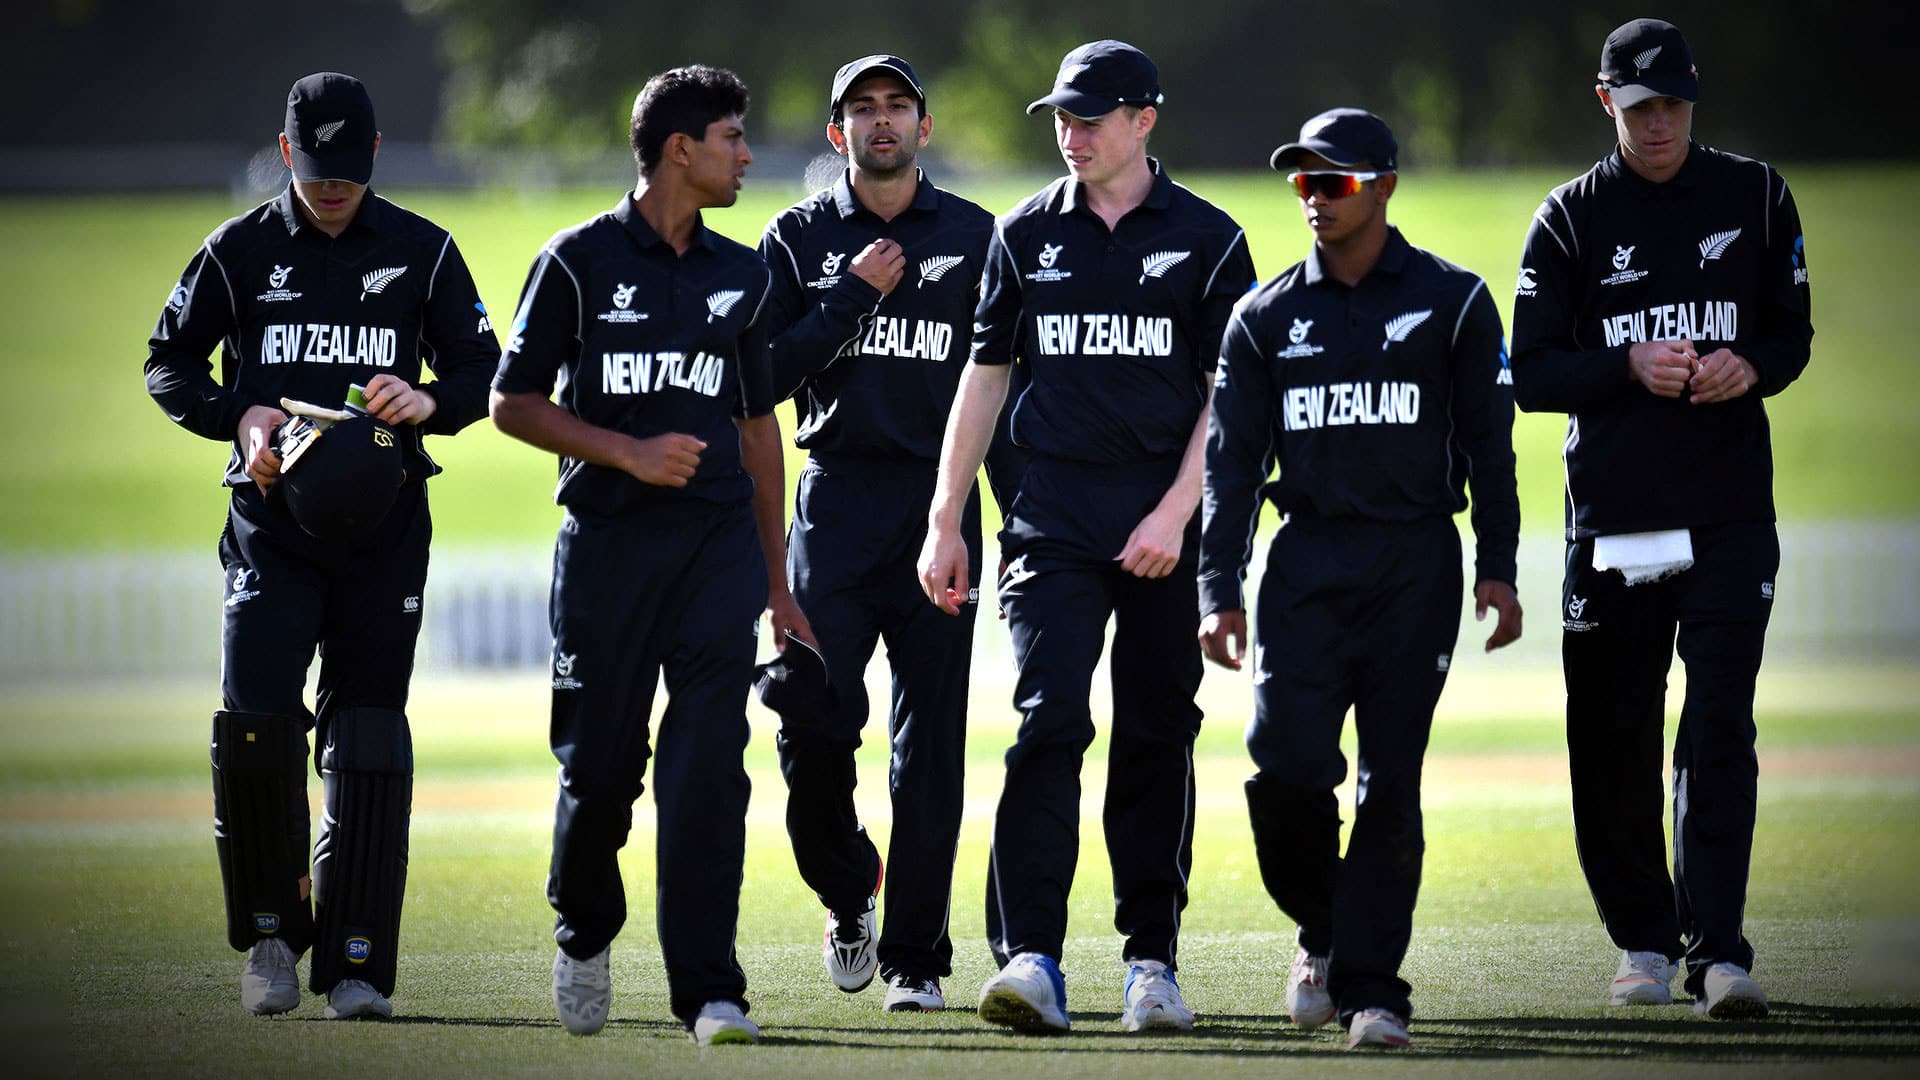 Image result for New Zealand Spirit of Cricket ICC U19 World Cup 2020"